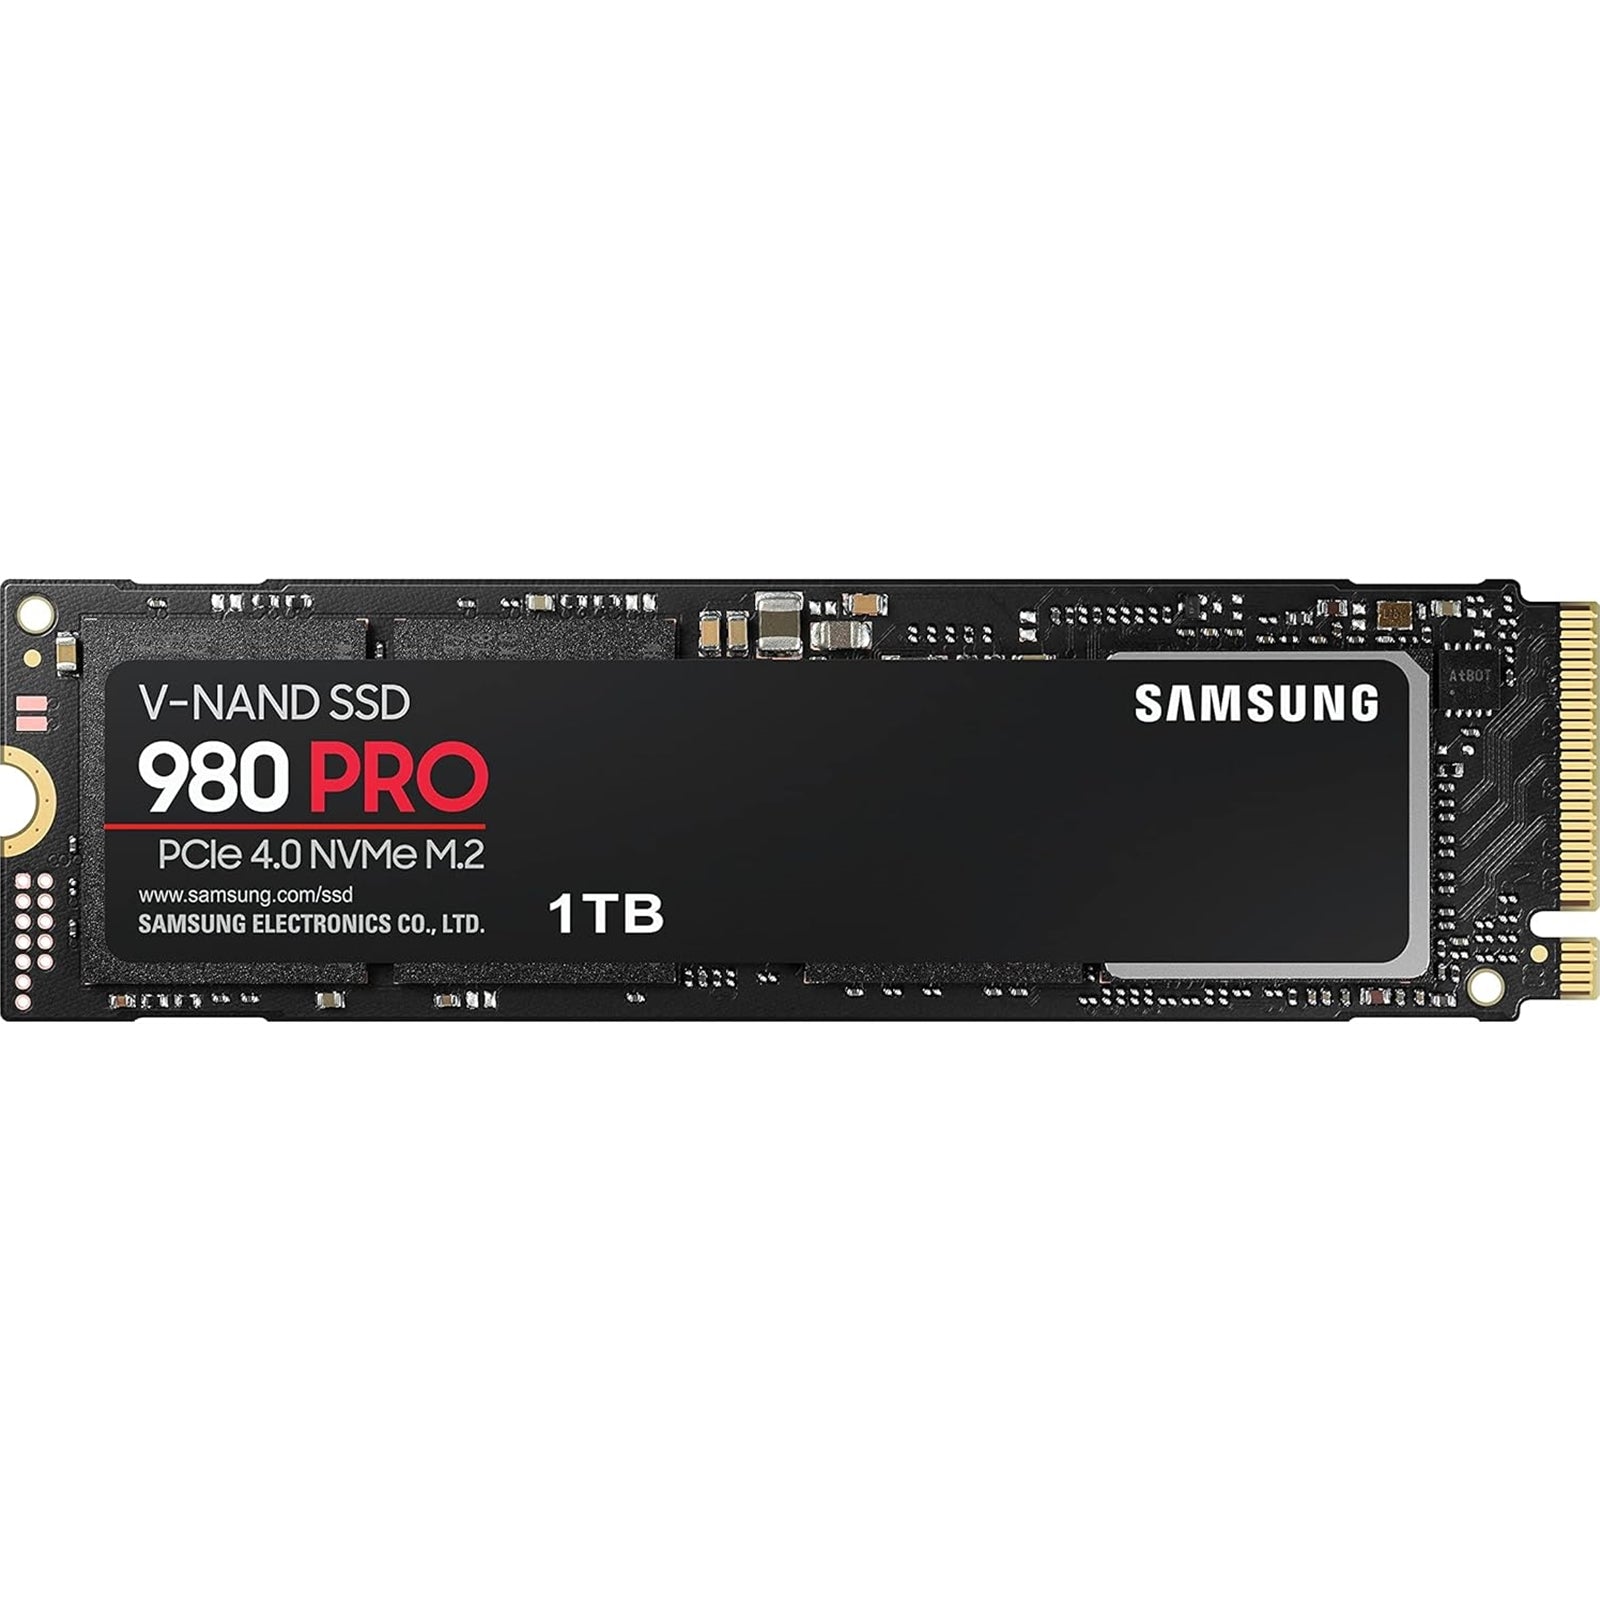 Samsung 980 PRO 1TB SSD - M.2 NVMe Interface with High-Speed PCIe 4.0, V-NAND Technology, and R/W Speeds of 7000/5000 MB/s